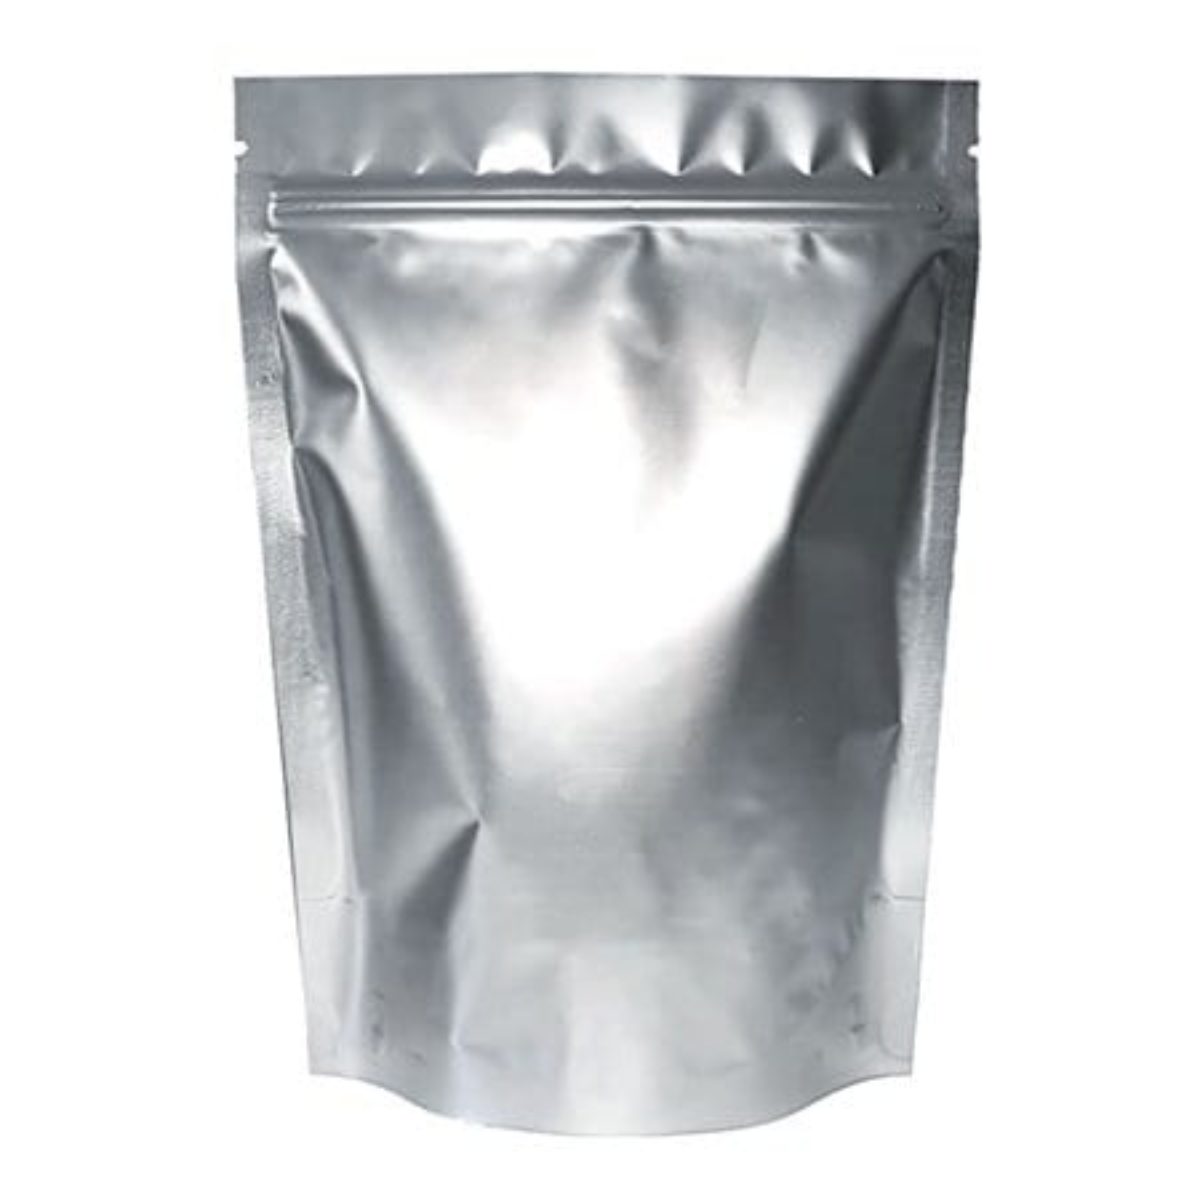 https://vacuumsealersunlimited.com/wp-content/uploads/STAND-UP-MYLAR-BAG-WITH-ZIPPER-1200x1200.jpeg